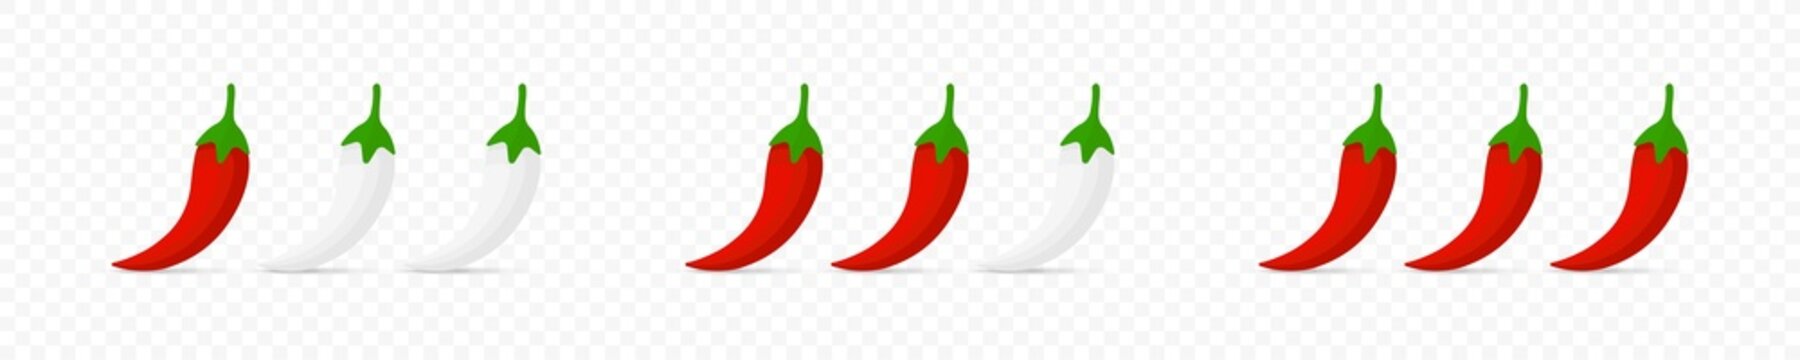 Pepper spiciness level. Pepper spice level. Red chilli pepper icons. Spicy peppers icons set. Isolated vector graphic